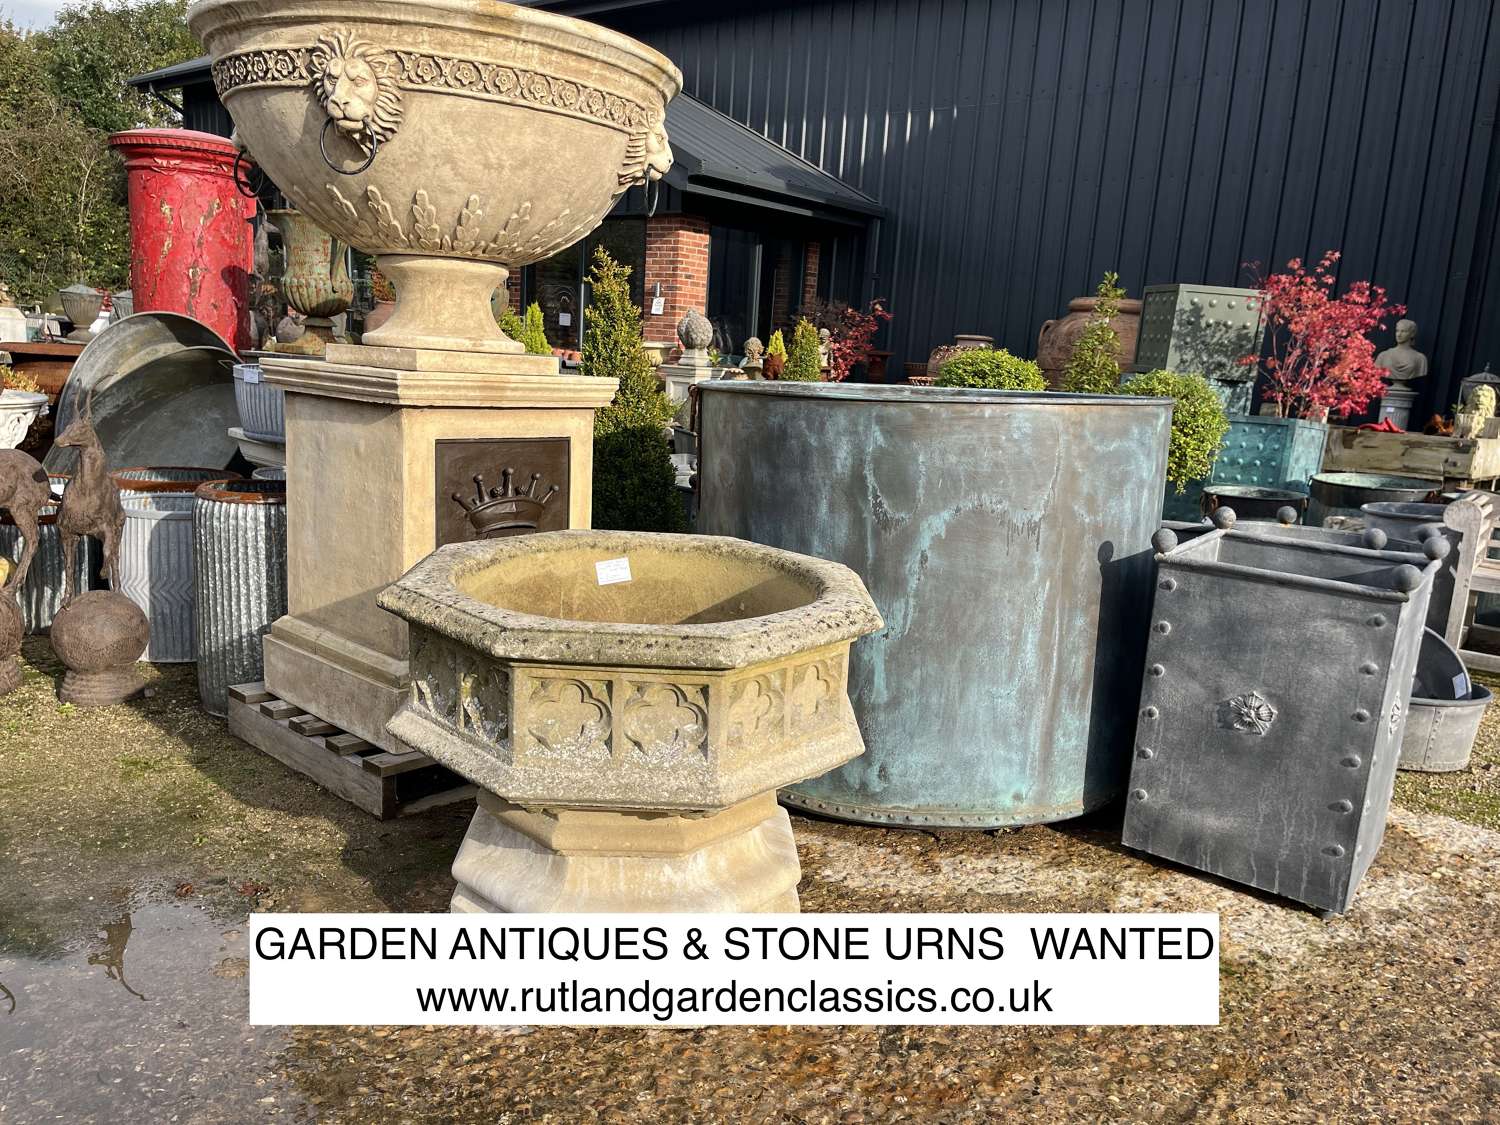 Stone Urns - Garden Antiques Wanted